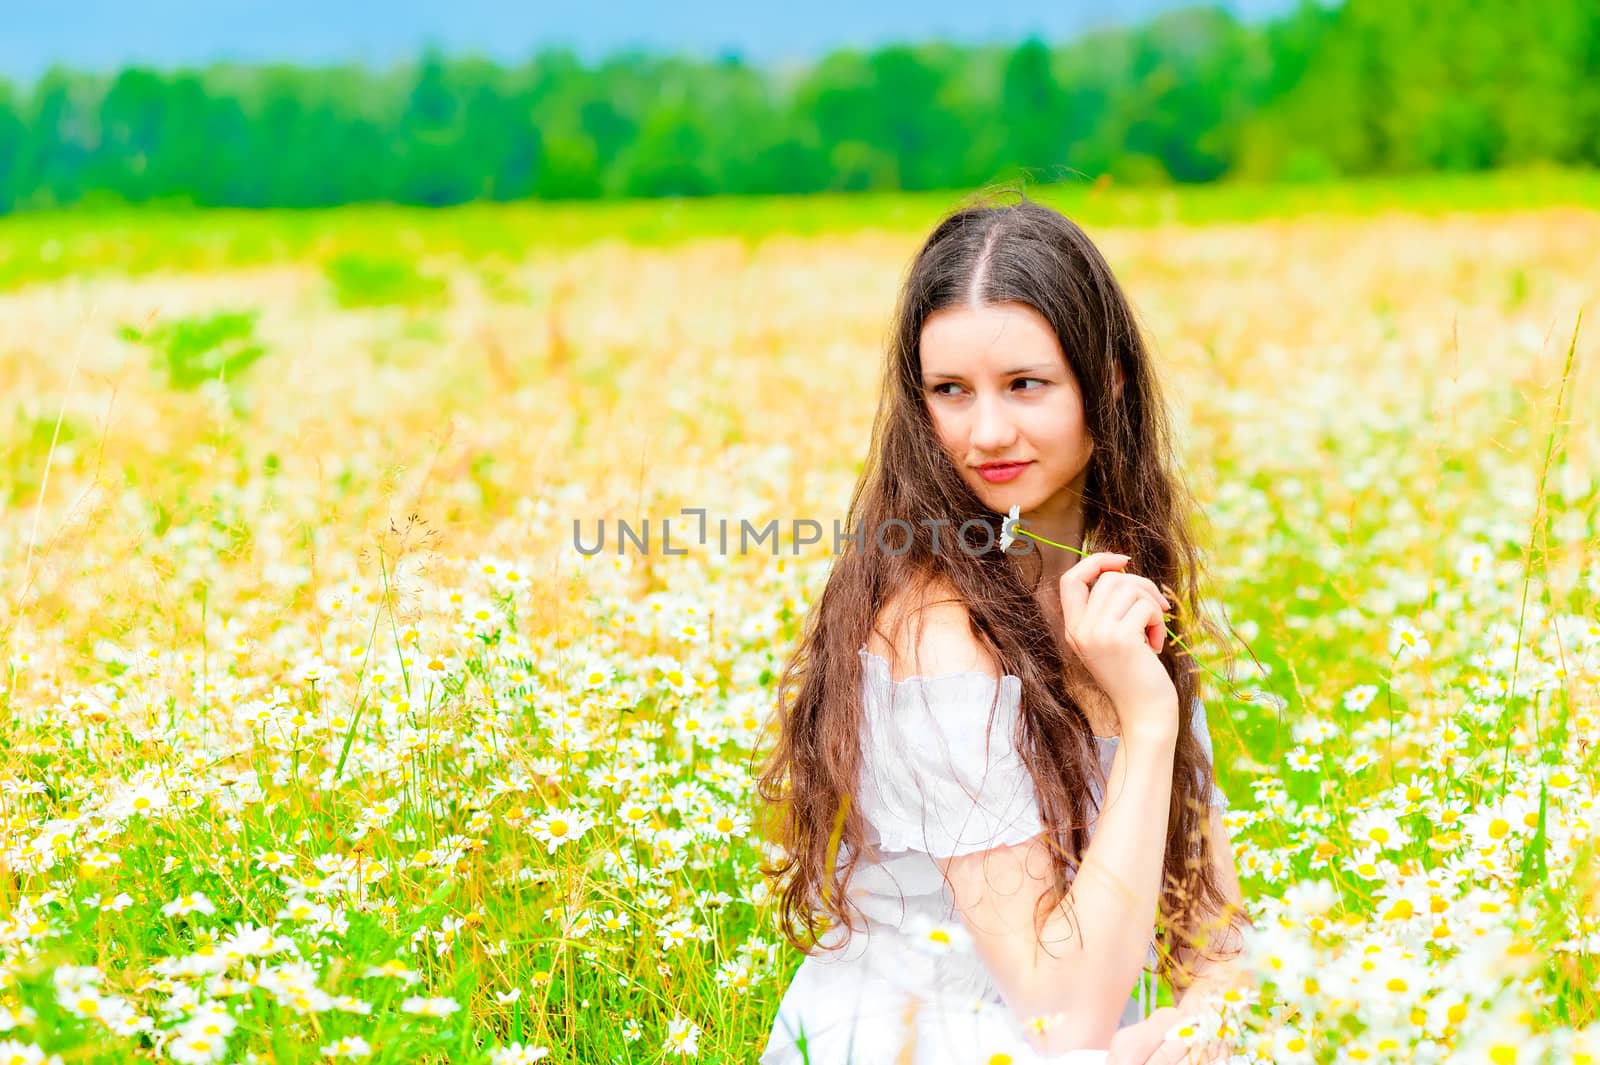 Attractive girl sitting in a field of daisies and looking away by kosmsos111